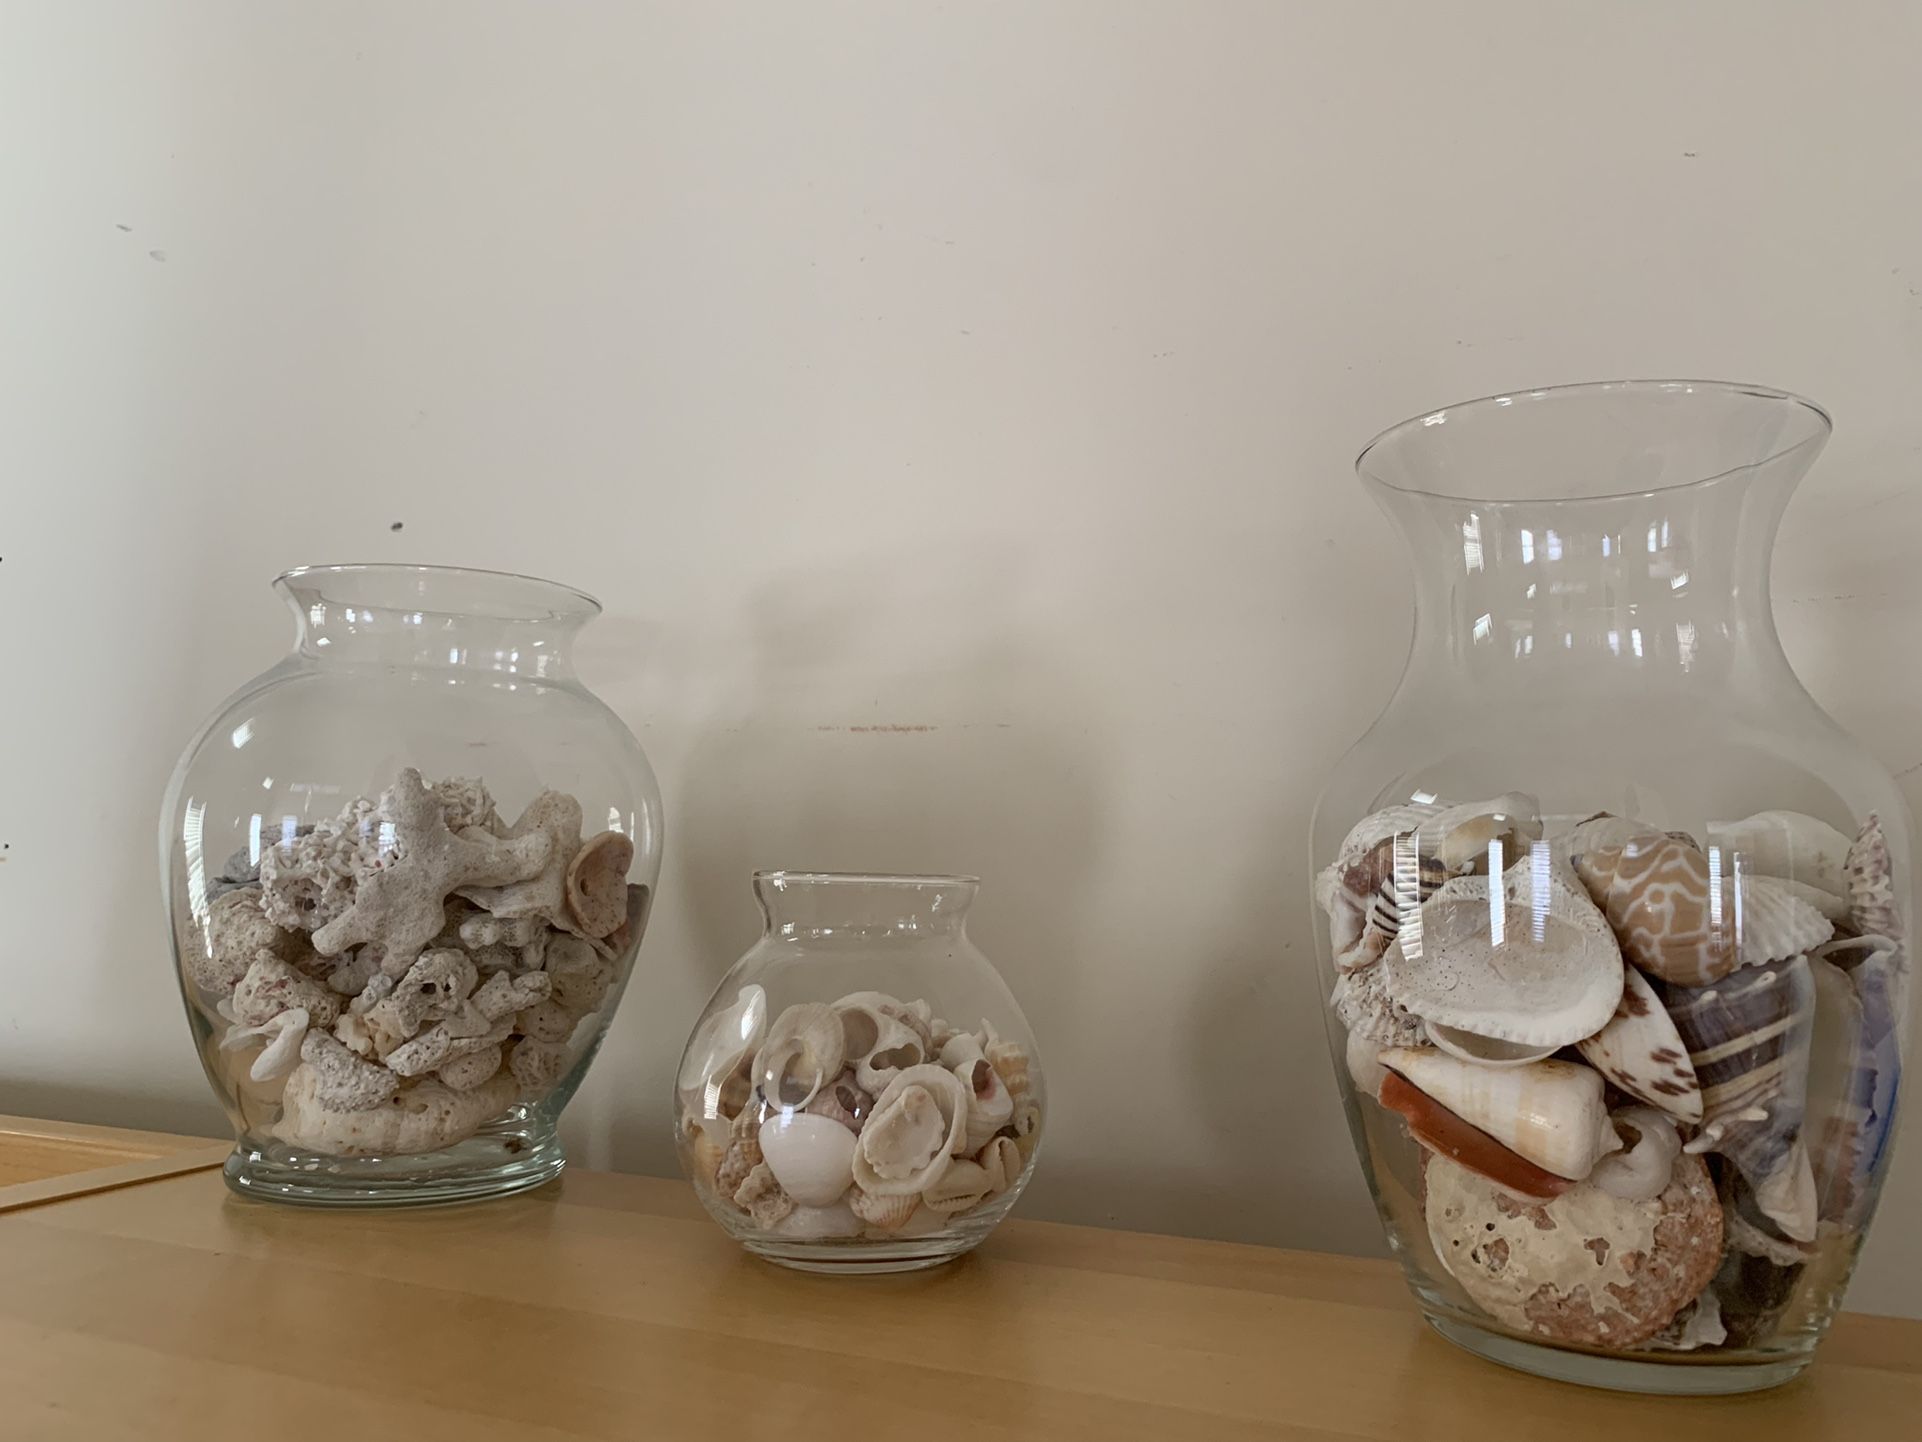 3 Various Shaped Clear Glass Vases ($8-12)